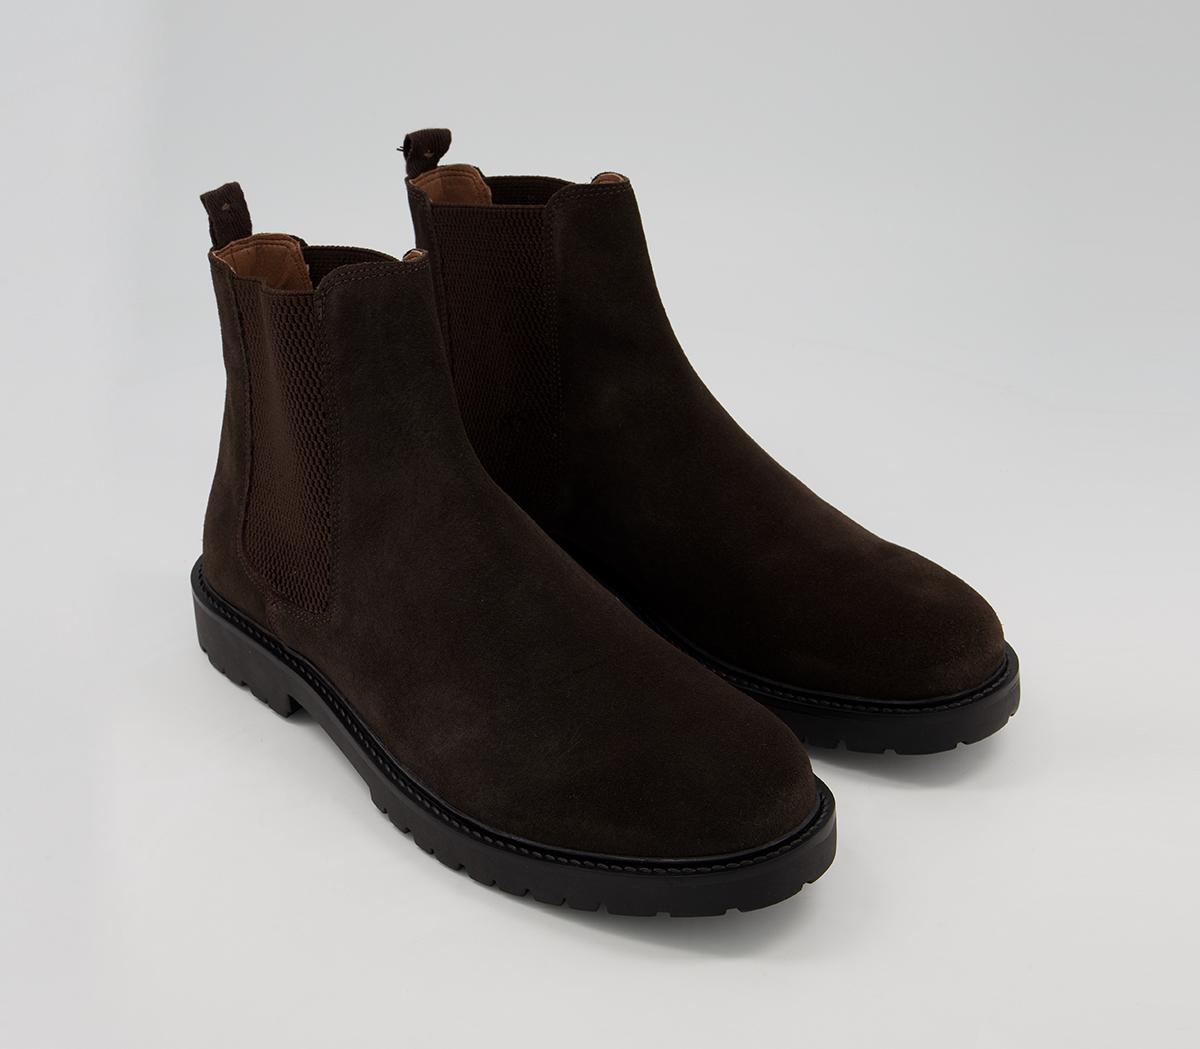 Hudson London Webber Boots Brown Waxy Suede - Boots